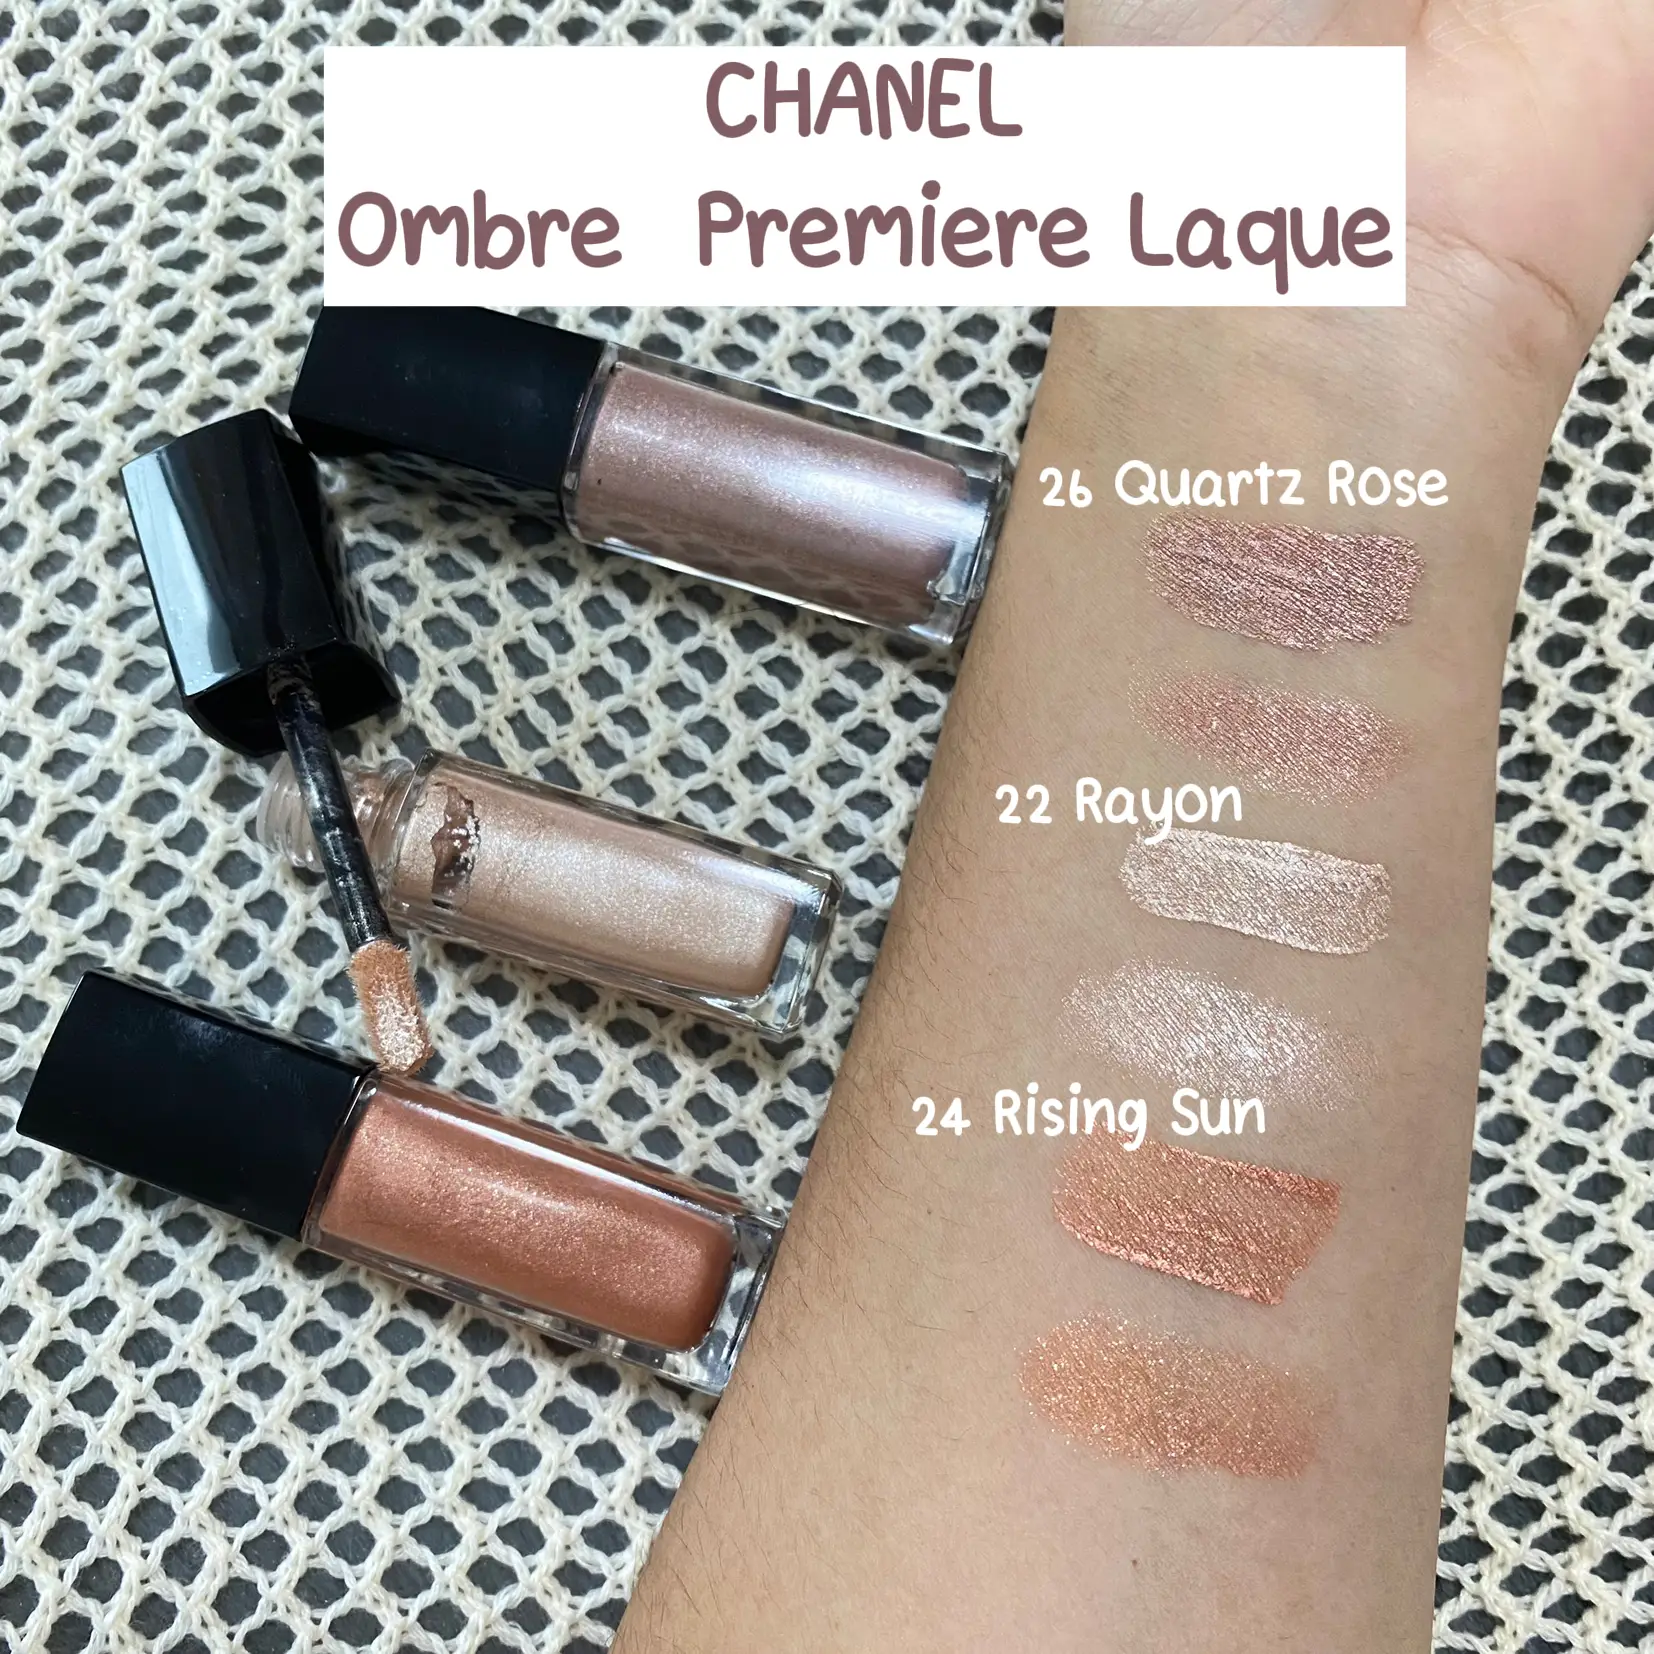 Chanel Ombre Premiere Laques Reviews & Swatches